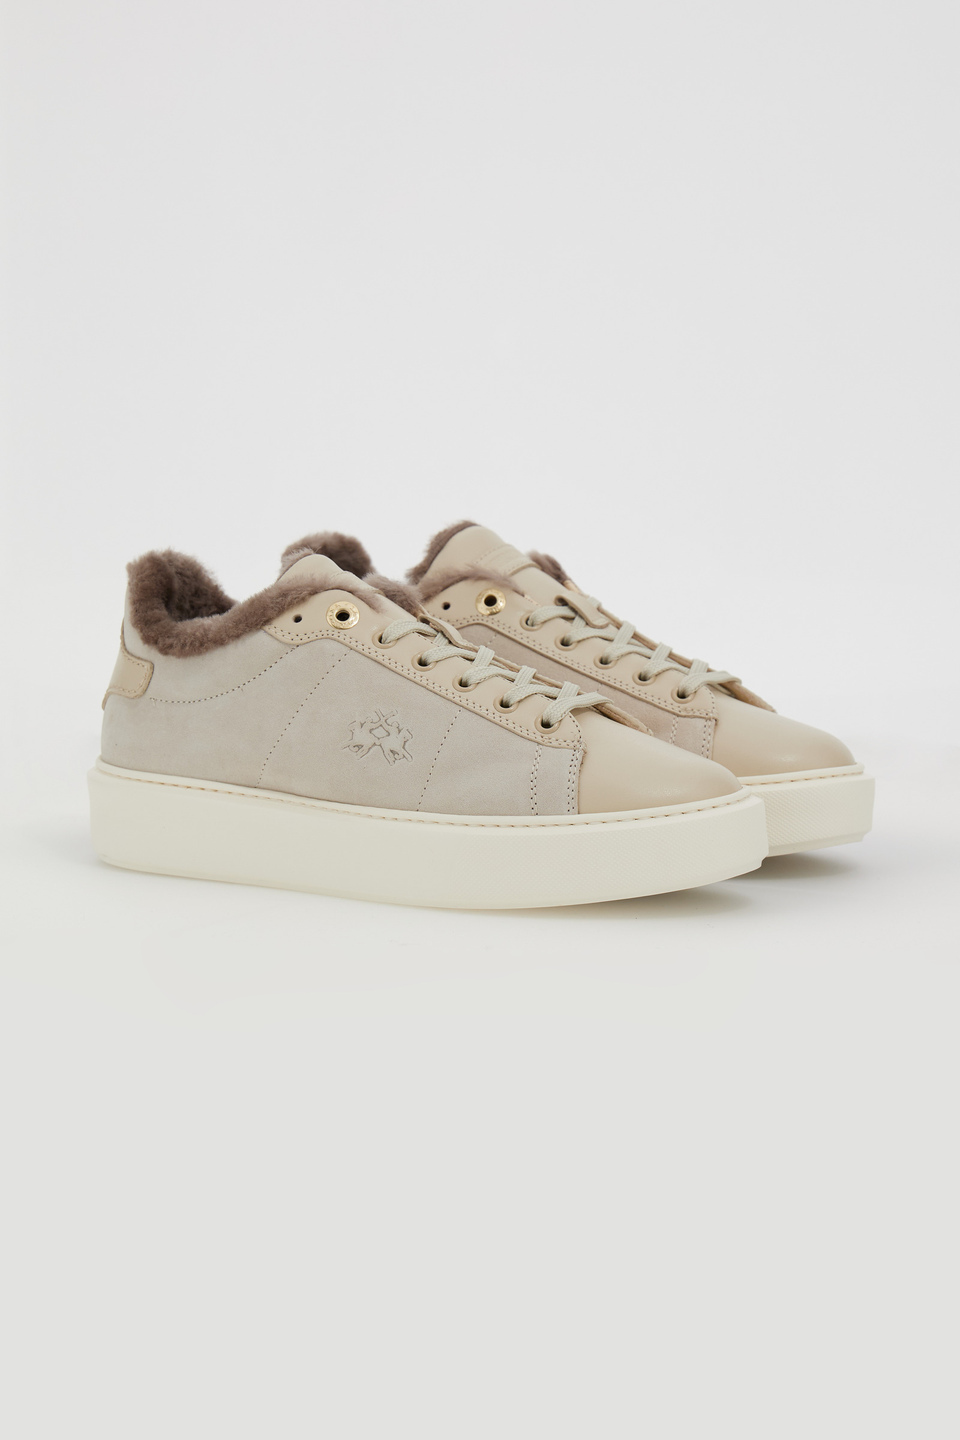 Women's trainers with inner lining | La Martina - Official Online Shop